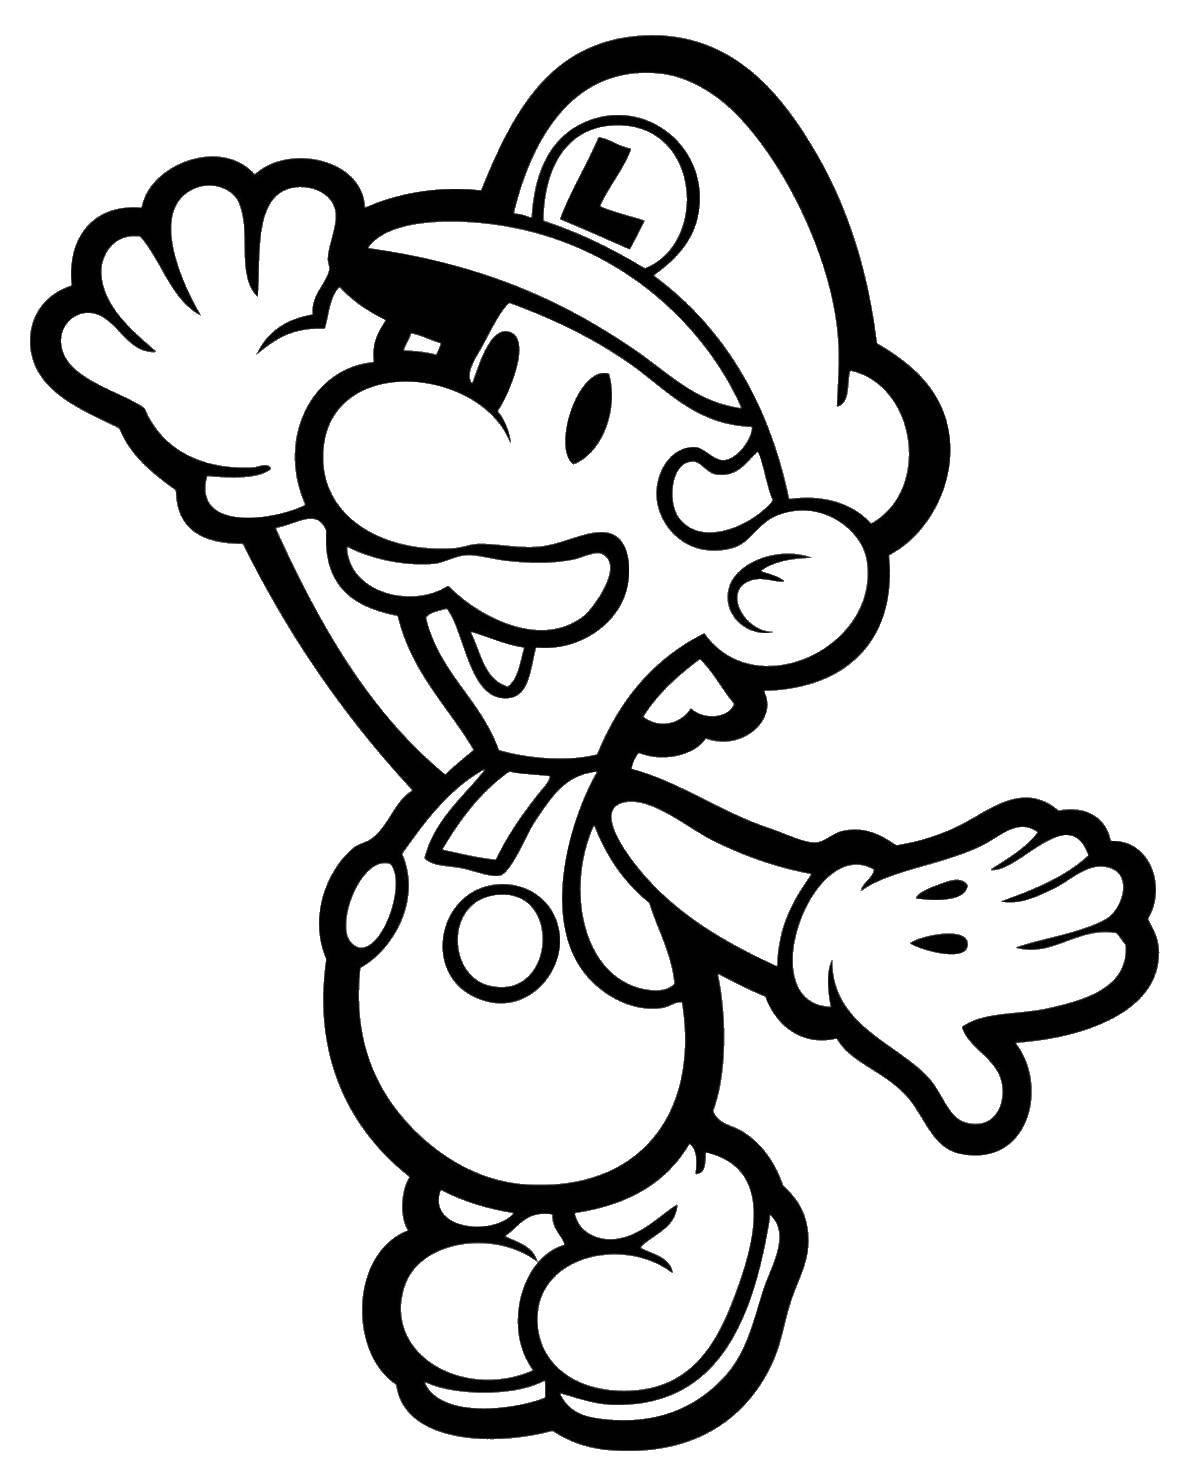 Coloring Luigi. Category The character from the game. Tags:  Games, Mario.